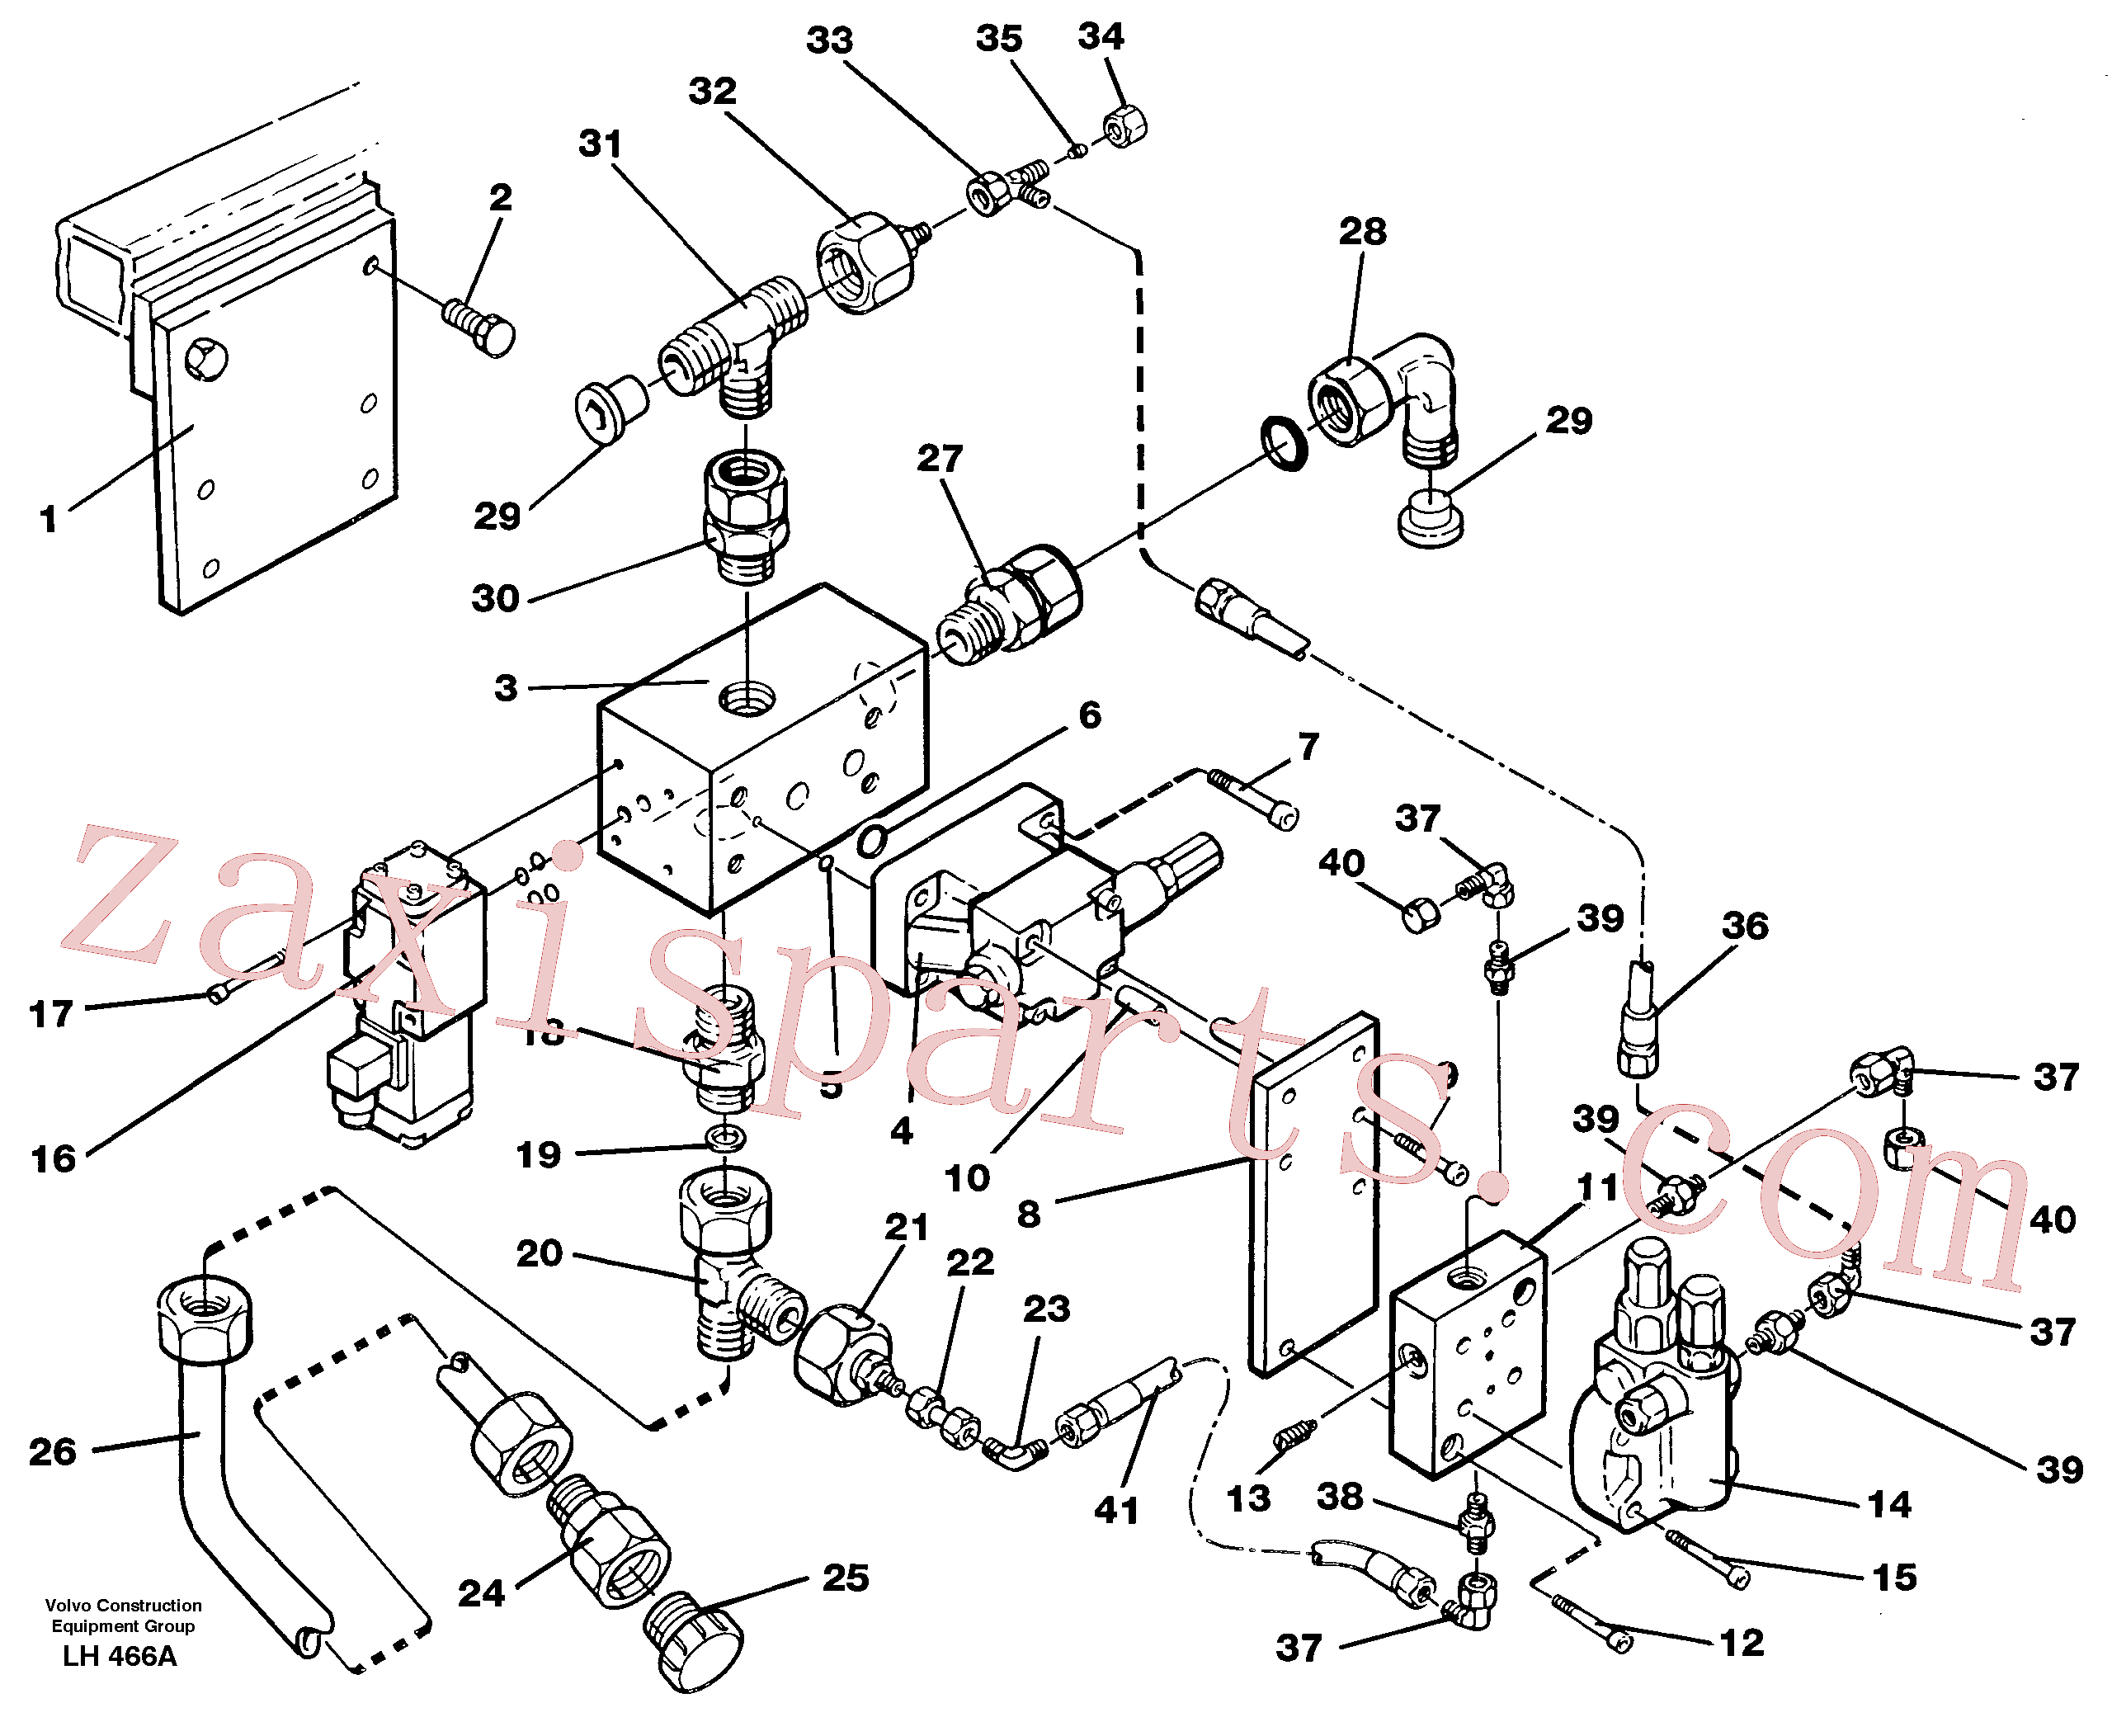 VOE14239616 for Volvo Magnet equipment, Älmhult, valve assembly(LH466A assembly)